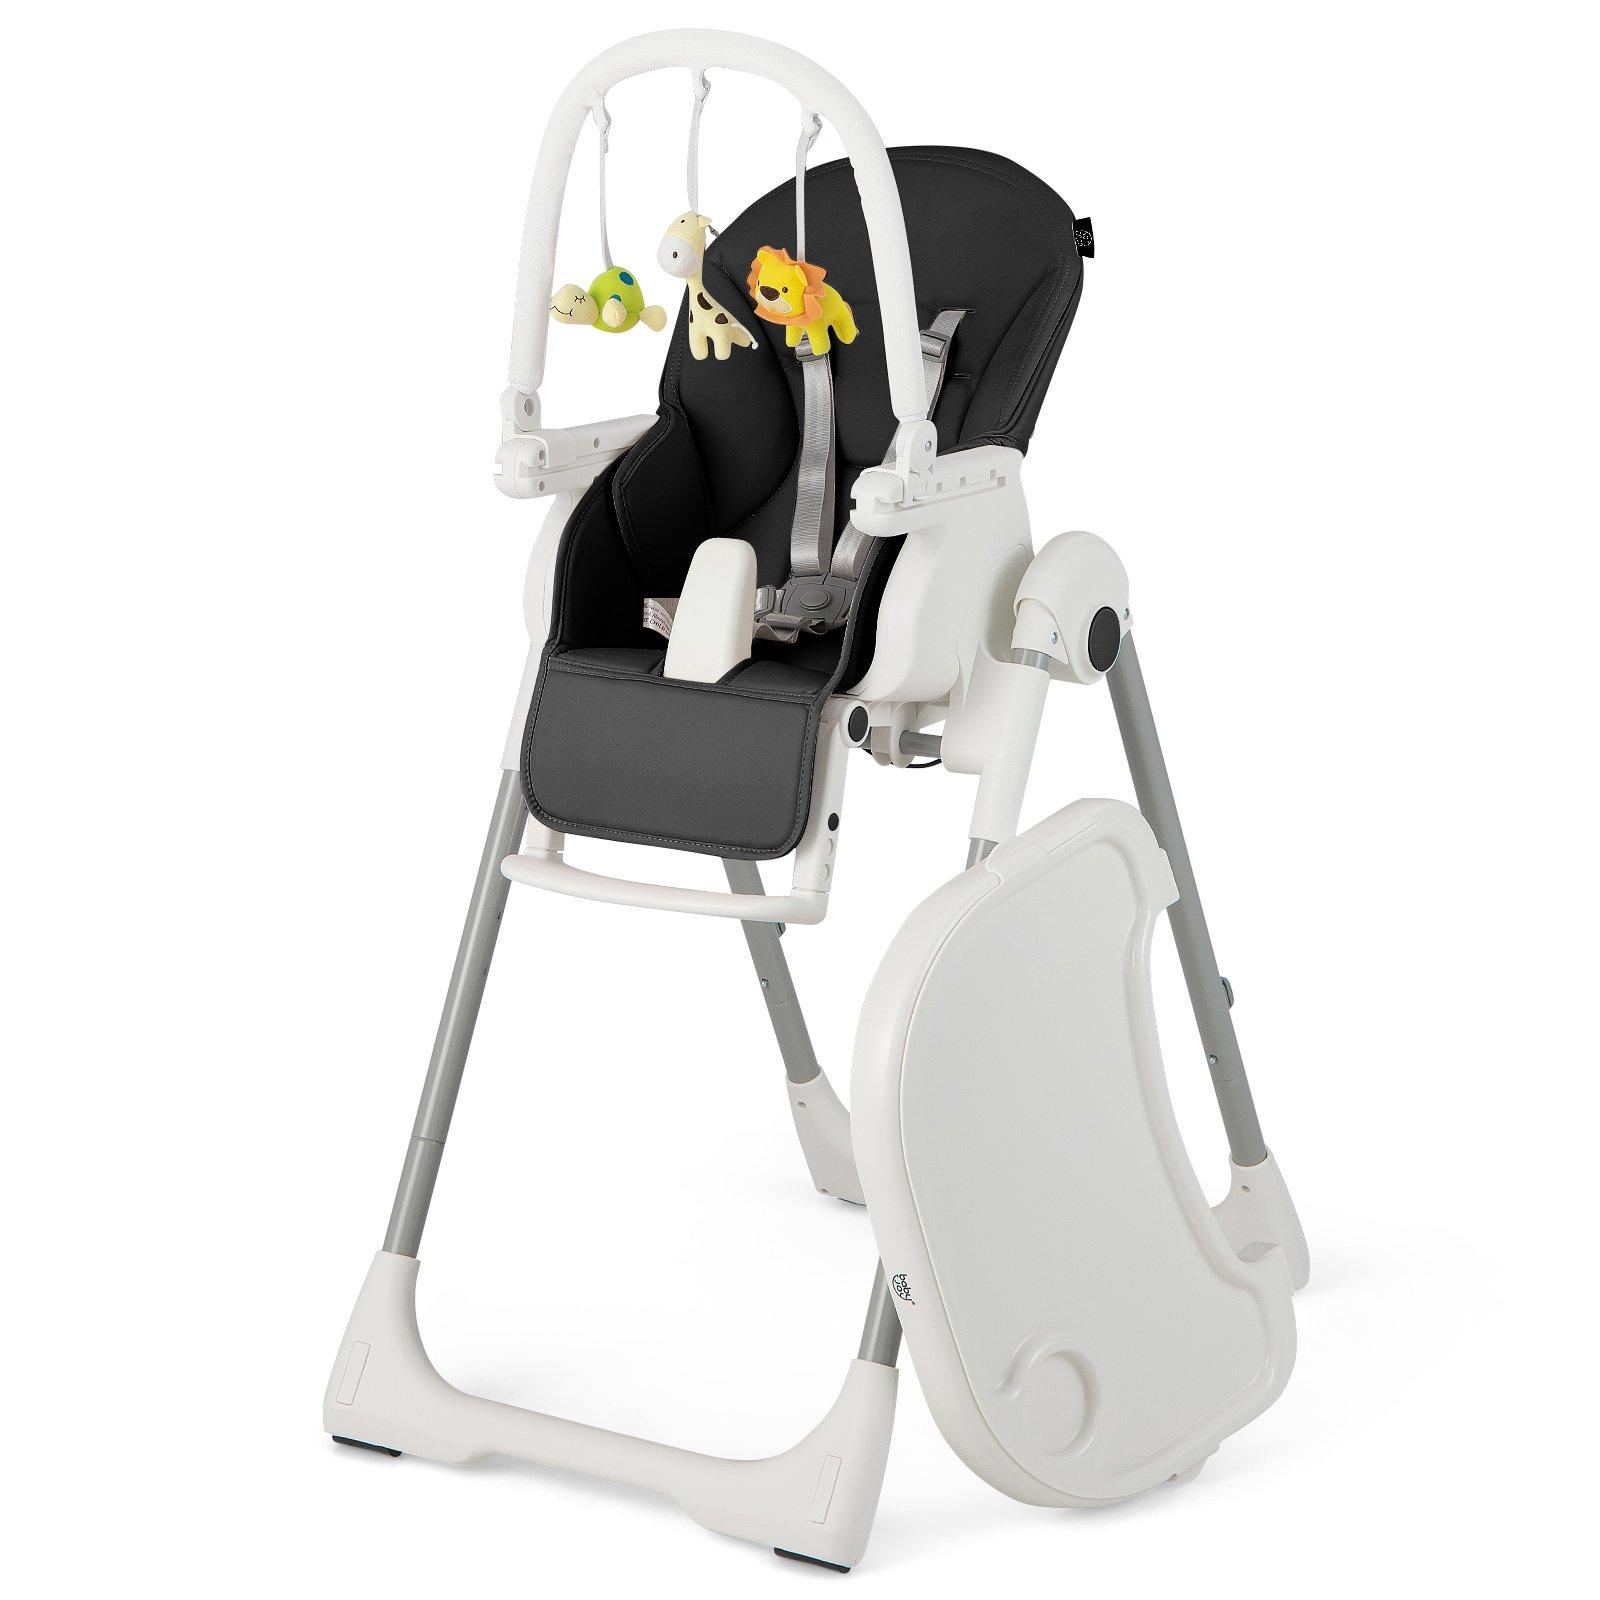 4-in-1 Baby High Chair Toddler Foldable Feeding Chair Adjustable Dining Chair